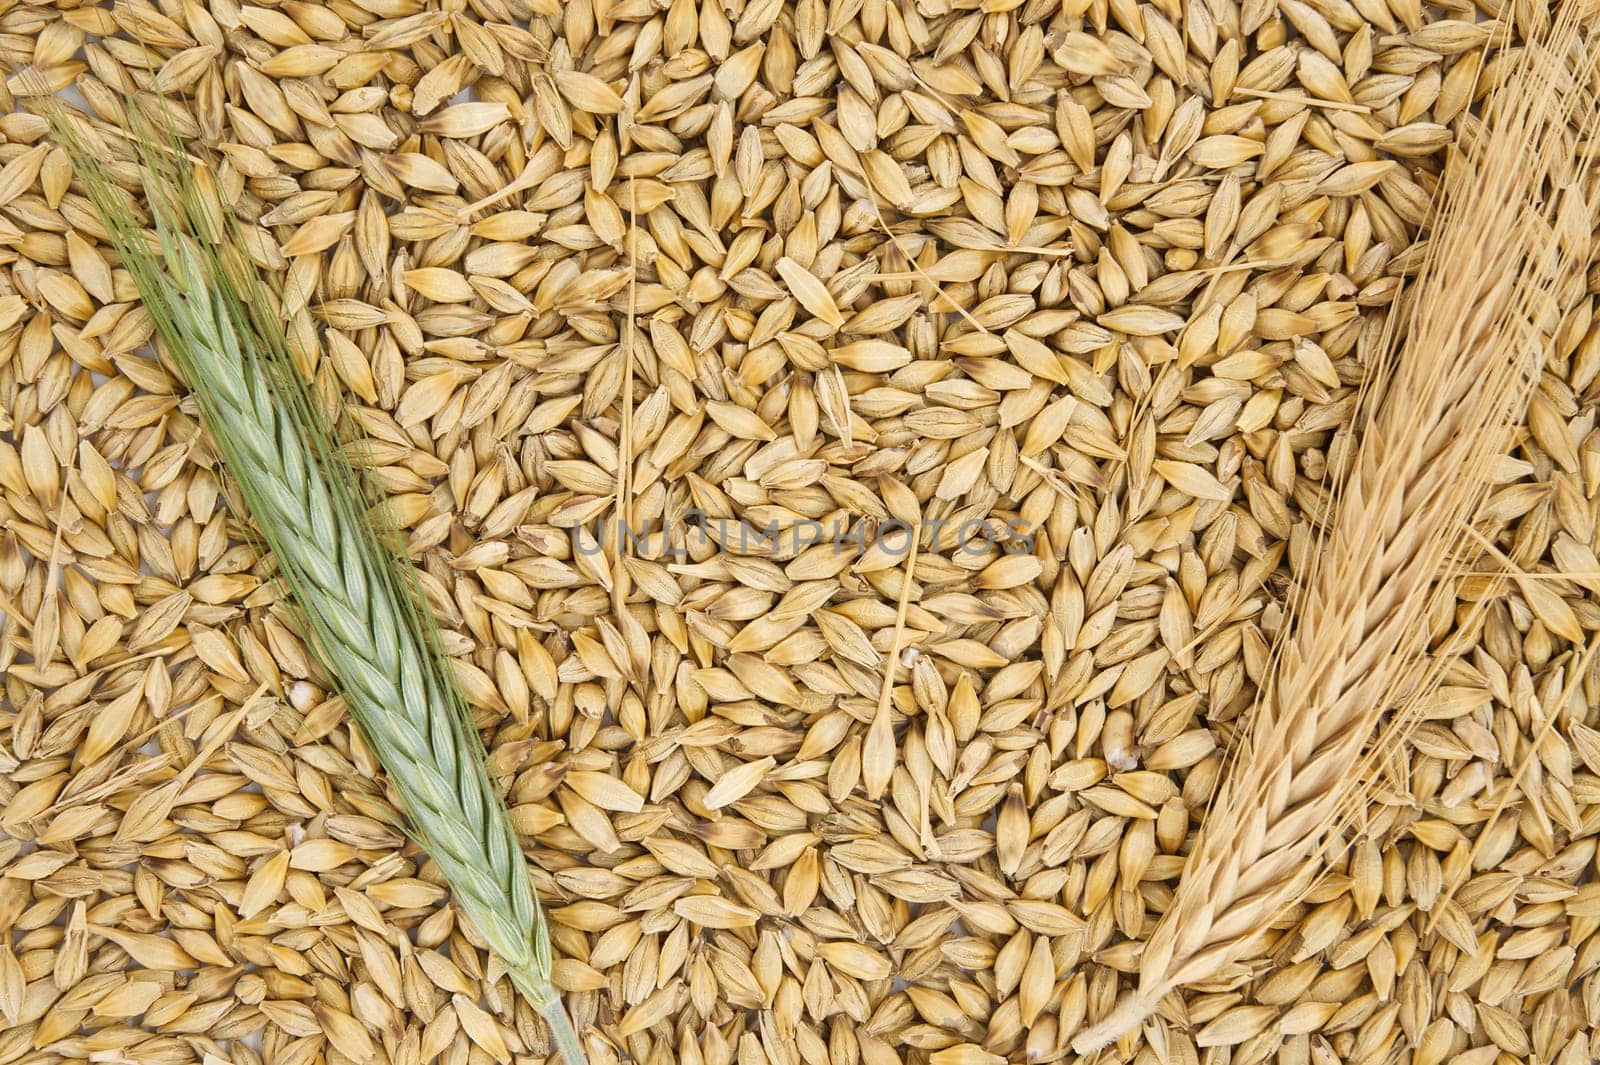 Barley seeds with the outer husk and barley ears by NetPix